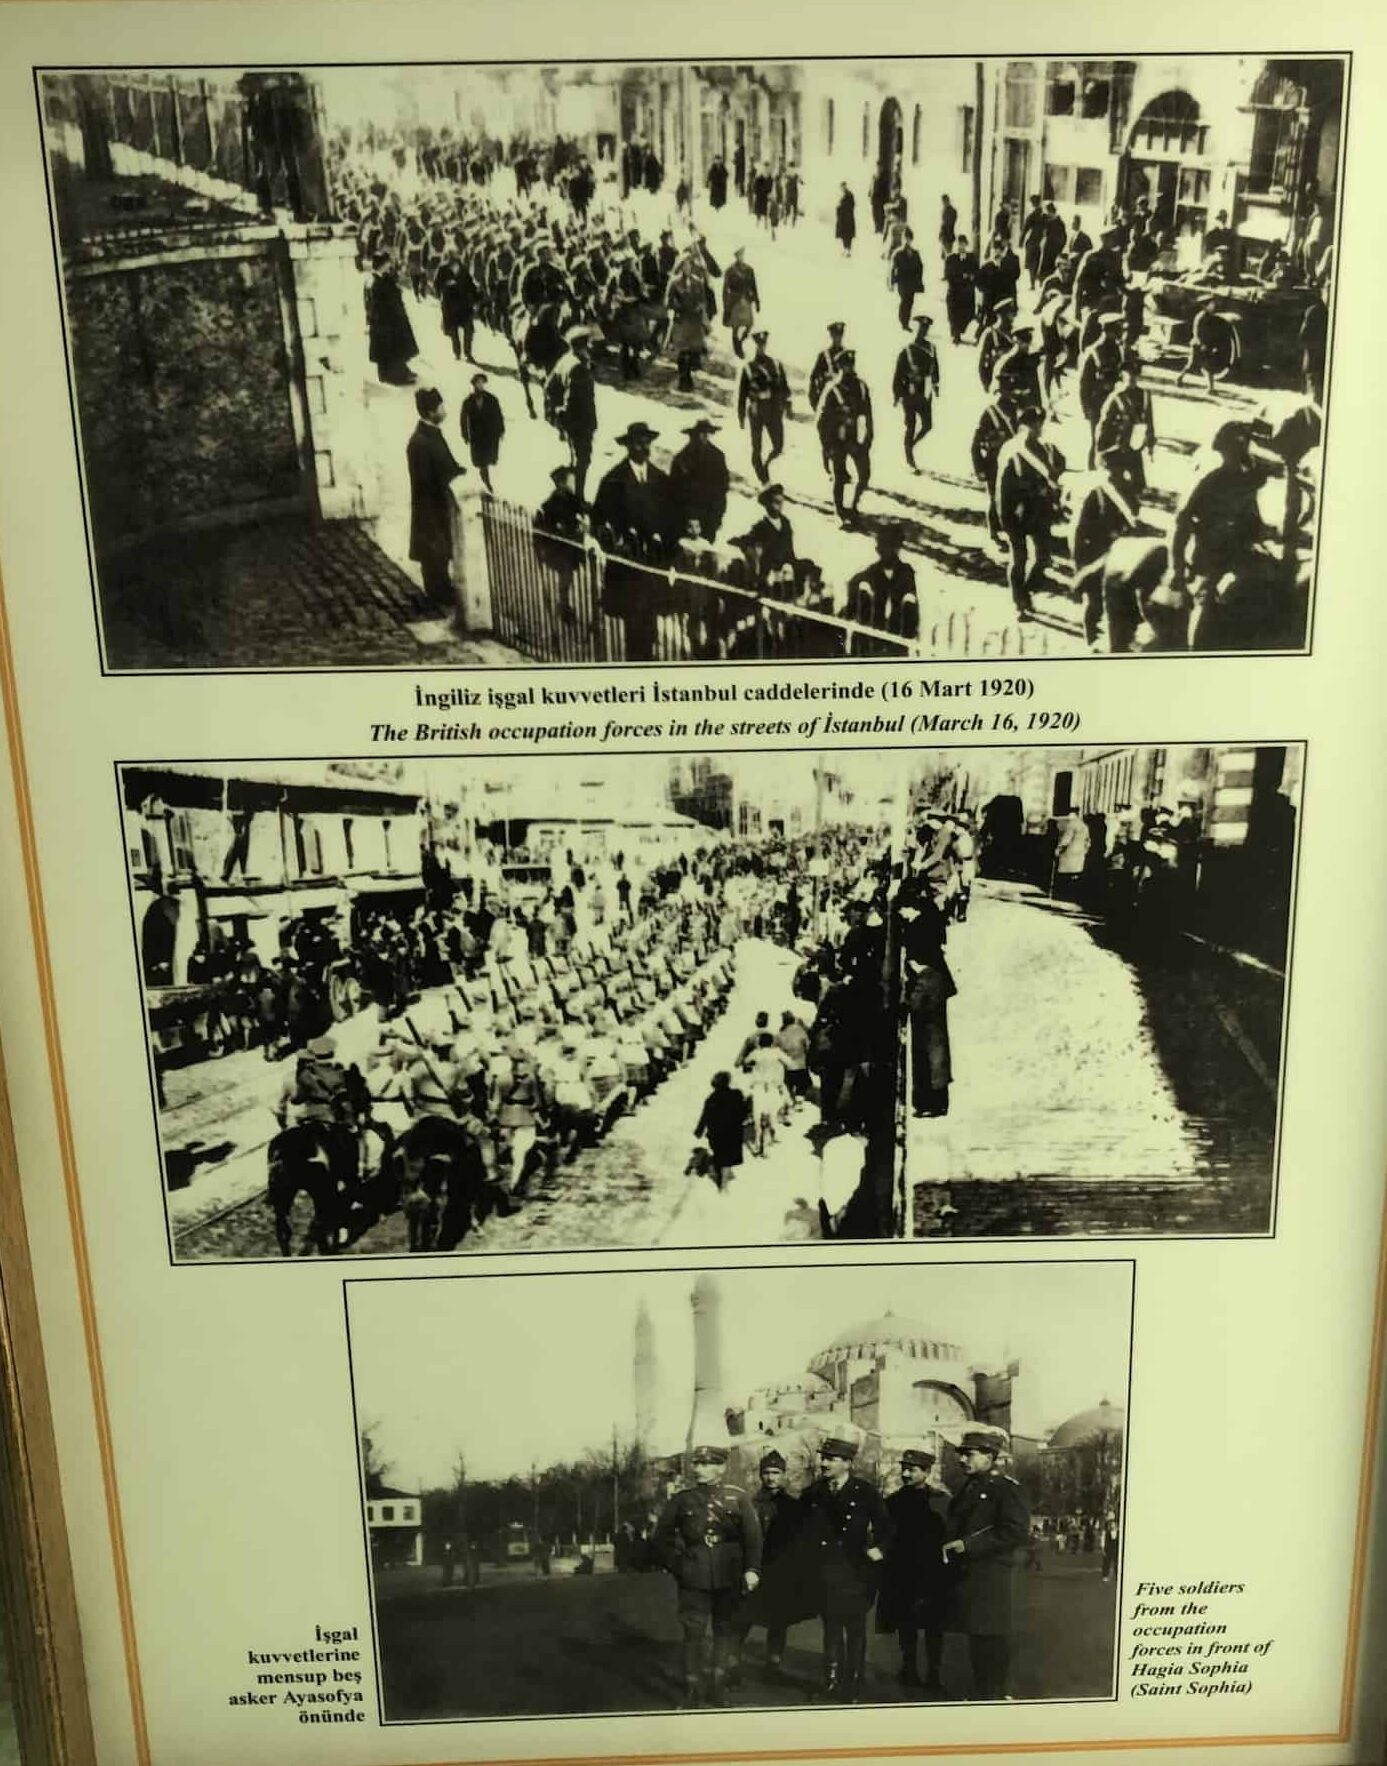 Photos of occupation forces in Constantinople at the Atatürk and War of Independence Museum at Anıtkabir in Ankara, Turkey